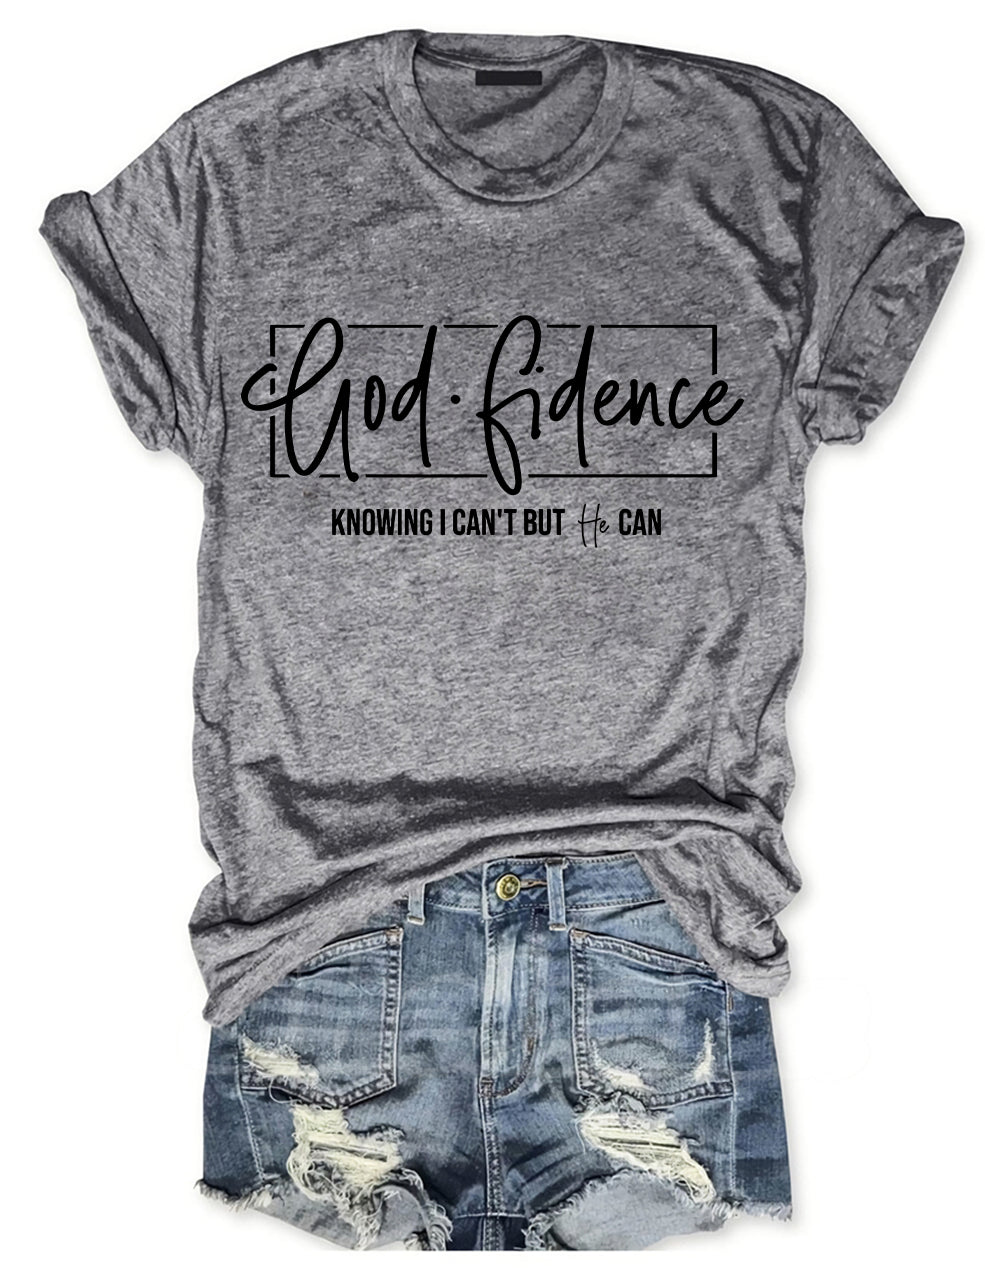 God Fidence Knowing I Can't But He Can T-shirt